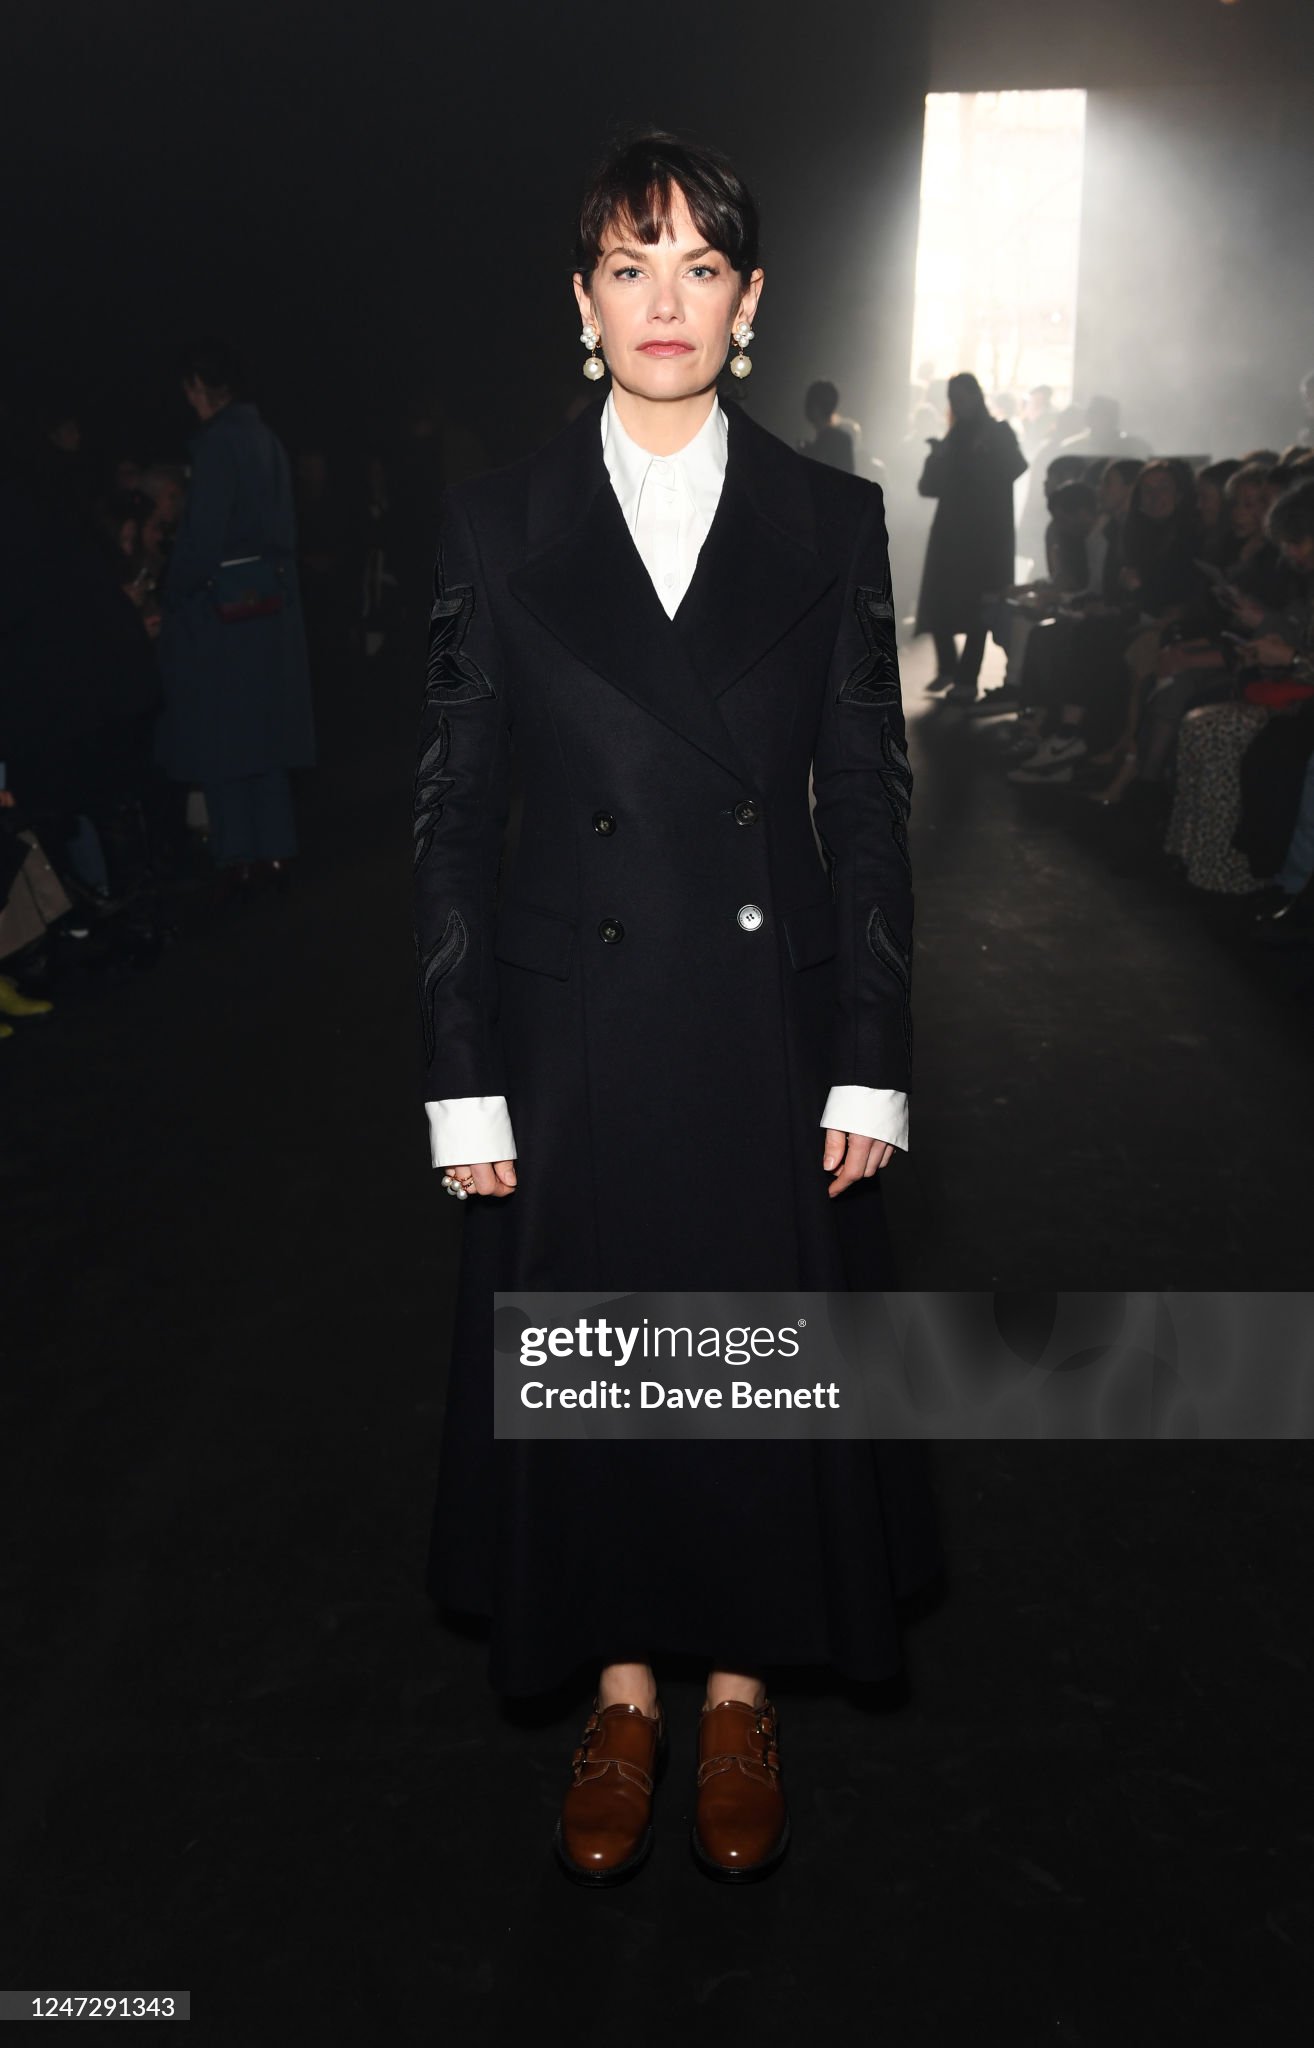 Ruth Wilson - attending London Fashion Week Show on 02/19/23 in HQ